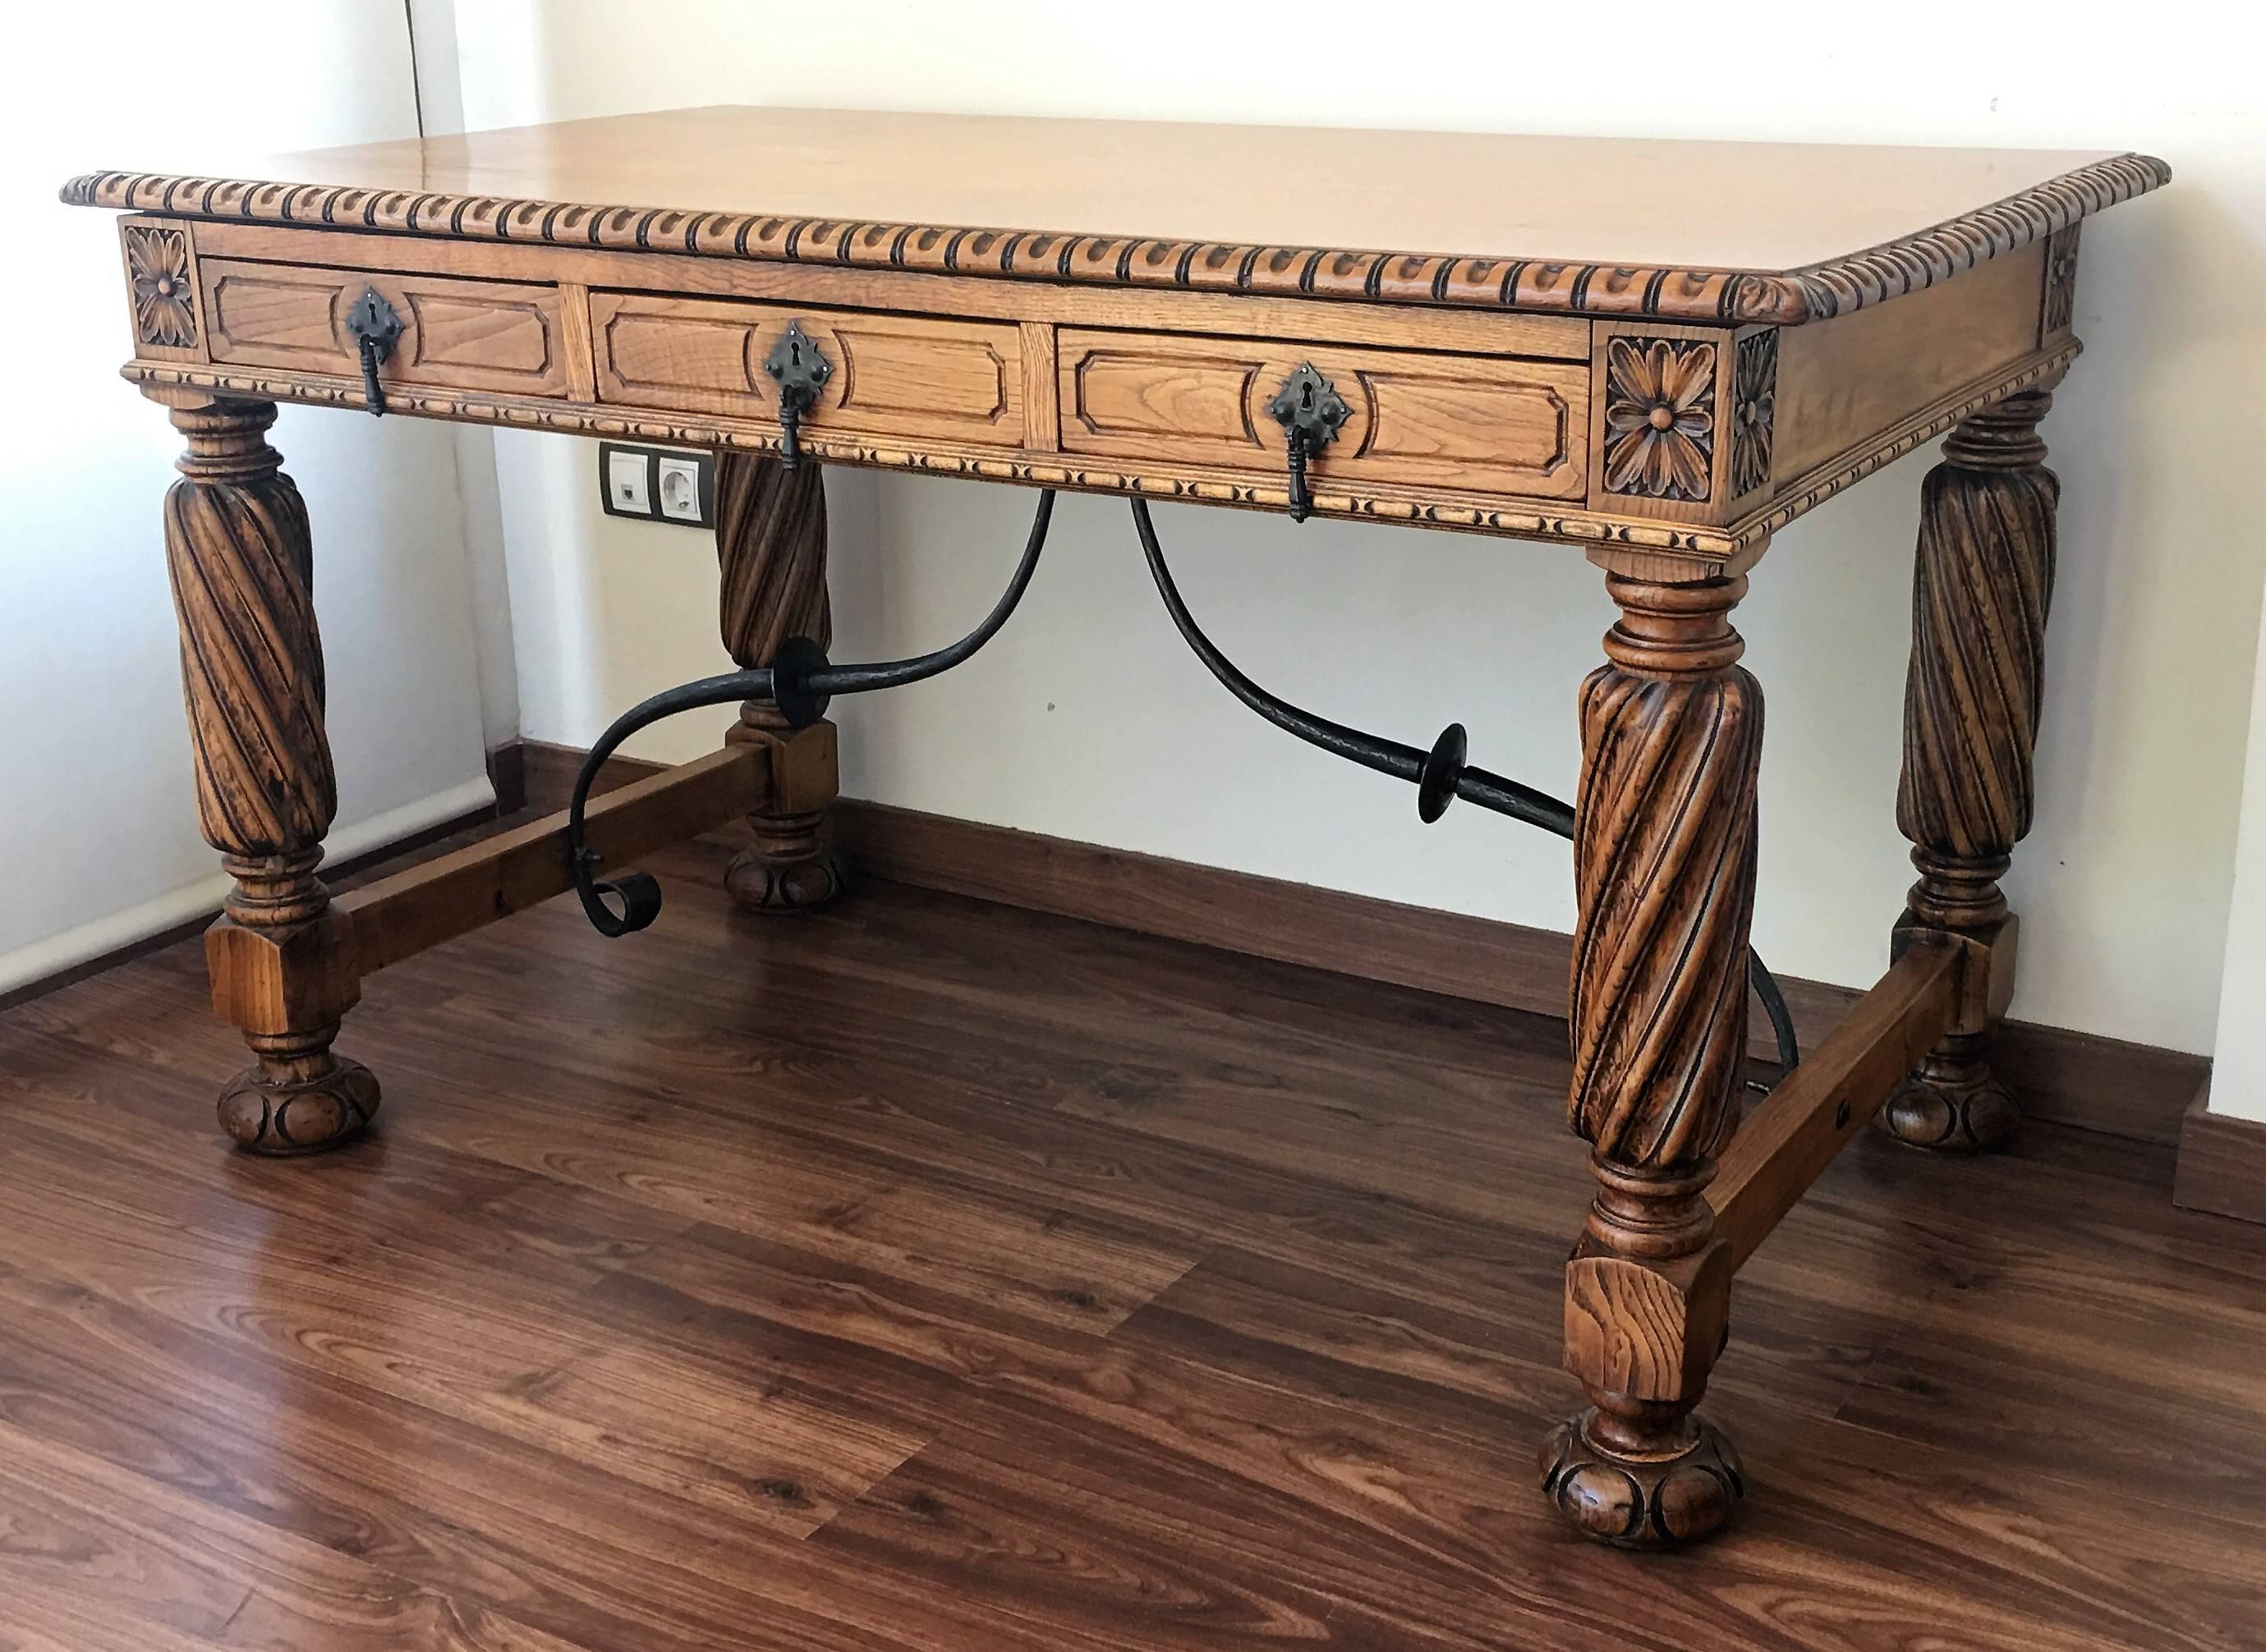 19th century pine and wrought iron desk with three drawers with turning legs
It is carved in back and front.
 